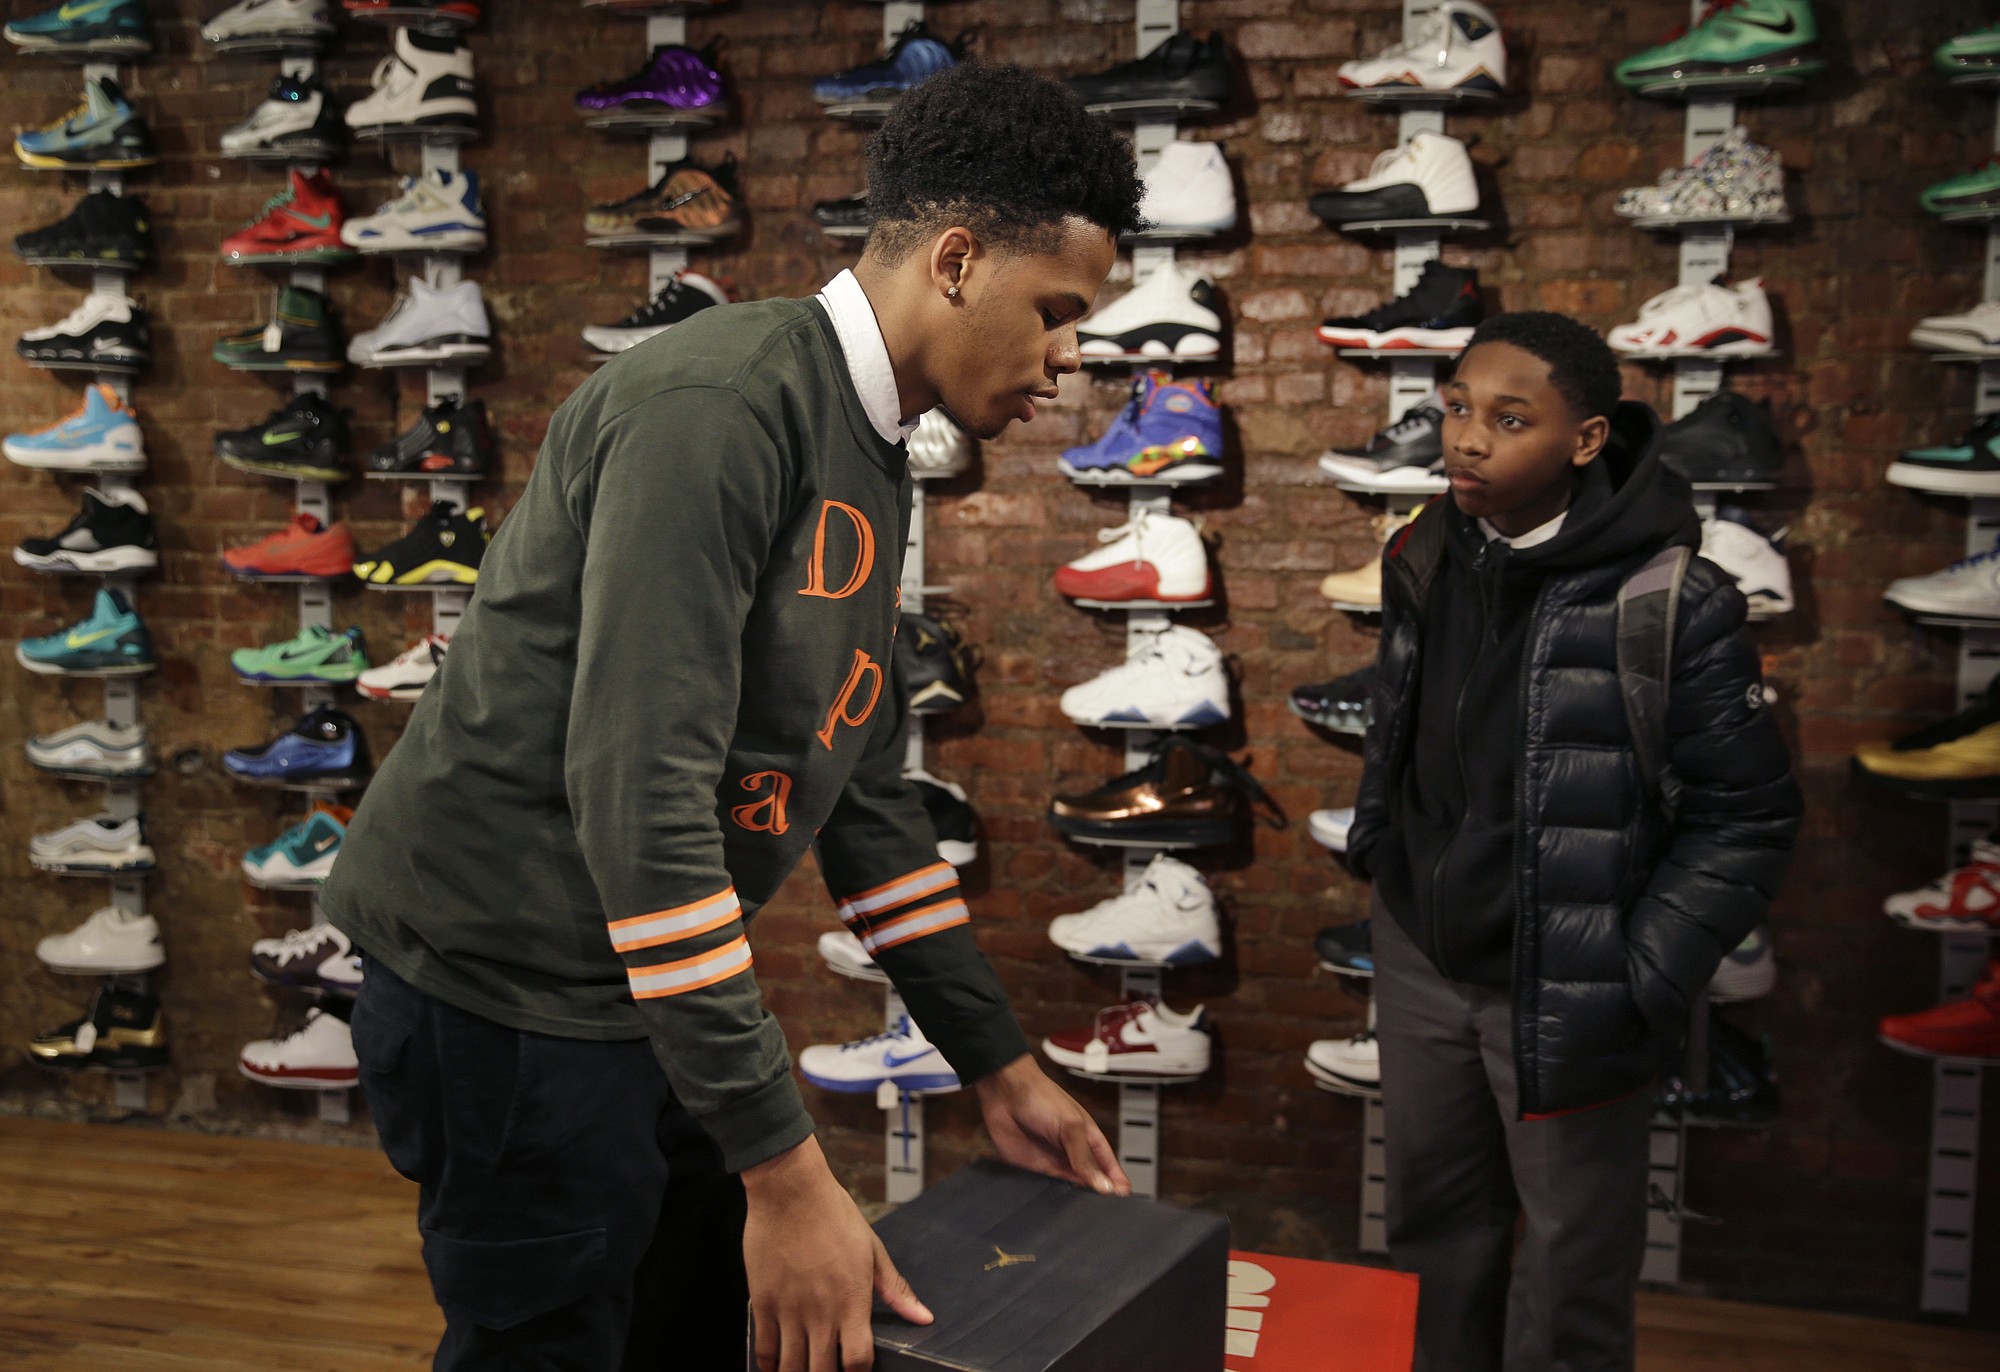 Chase Reed, left, boxes up a pair of shoes Monday for a customer, Chaise Mack, at Sneaker Pawn in the Harlem section of New York. Chase and his father opened Sneaker Pawn looking to capitalize on America's multi-billion dollar athletic footwear market.